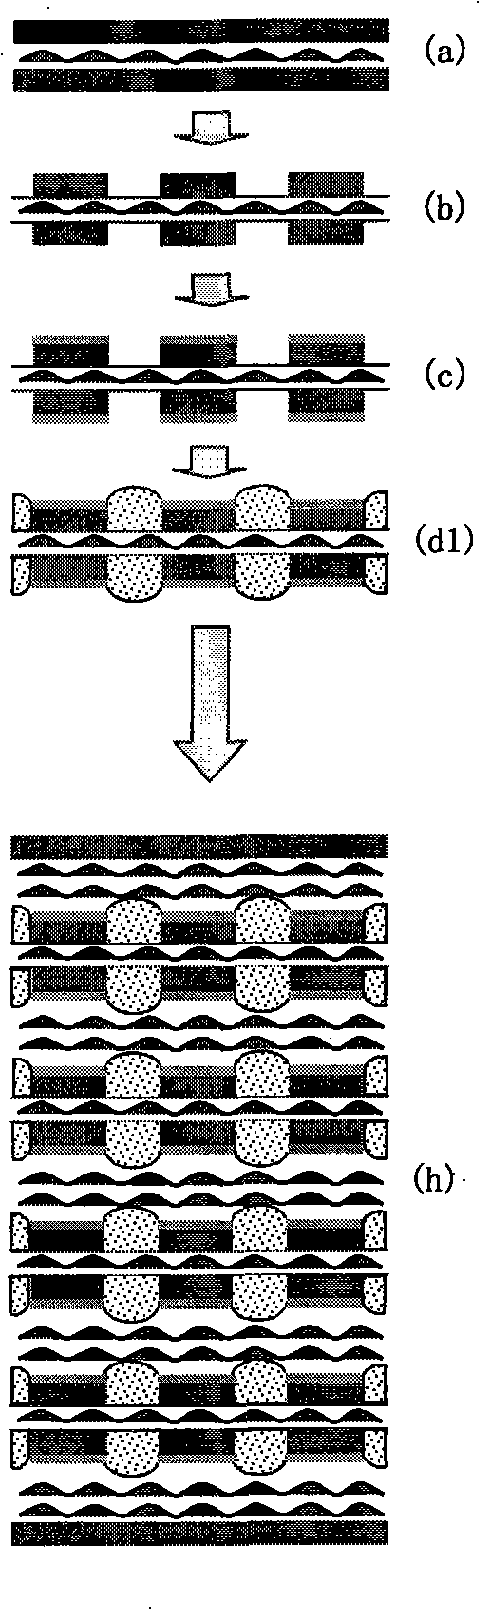 Liquid thermosetting resin composition and method for manufacturing printed circuit board using the same